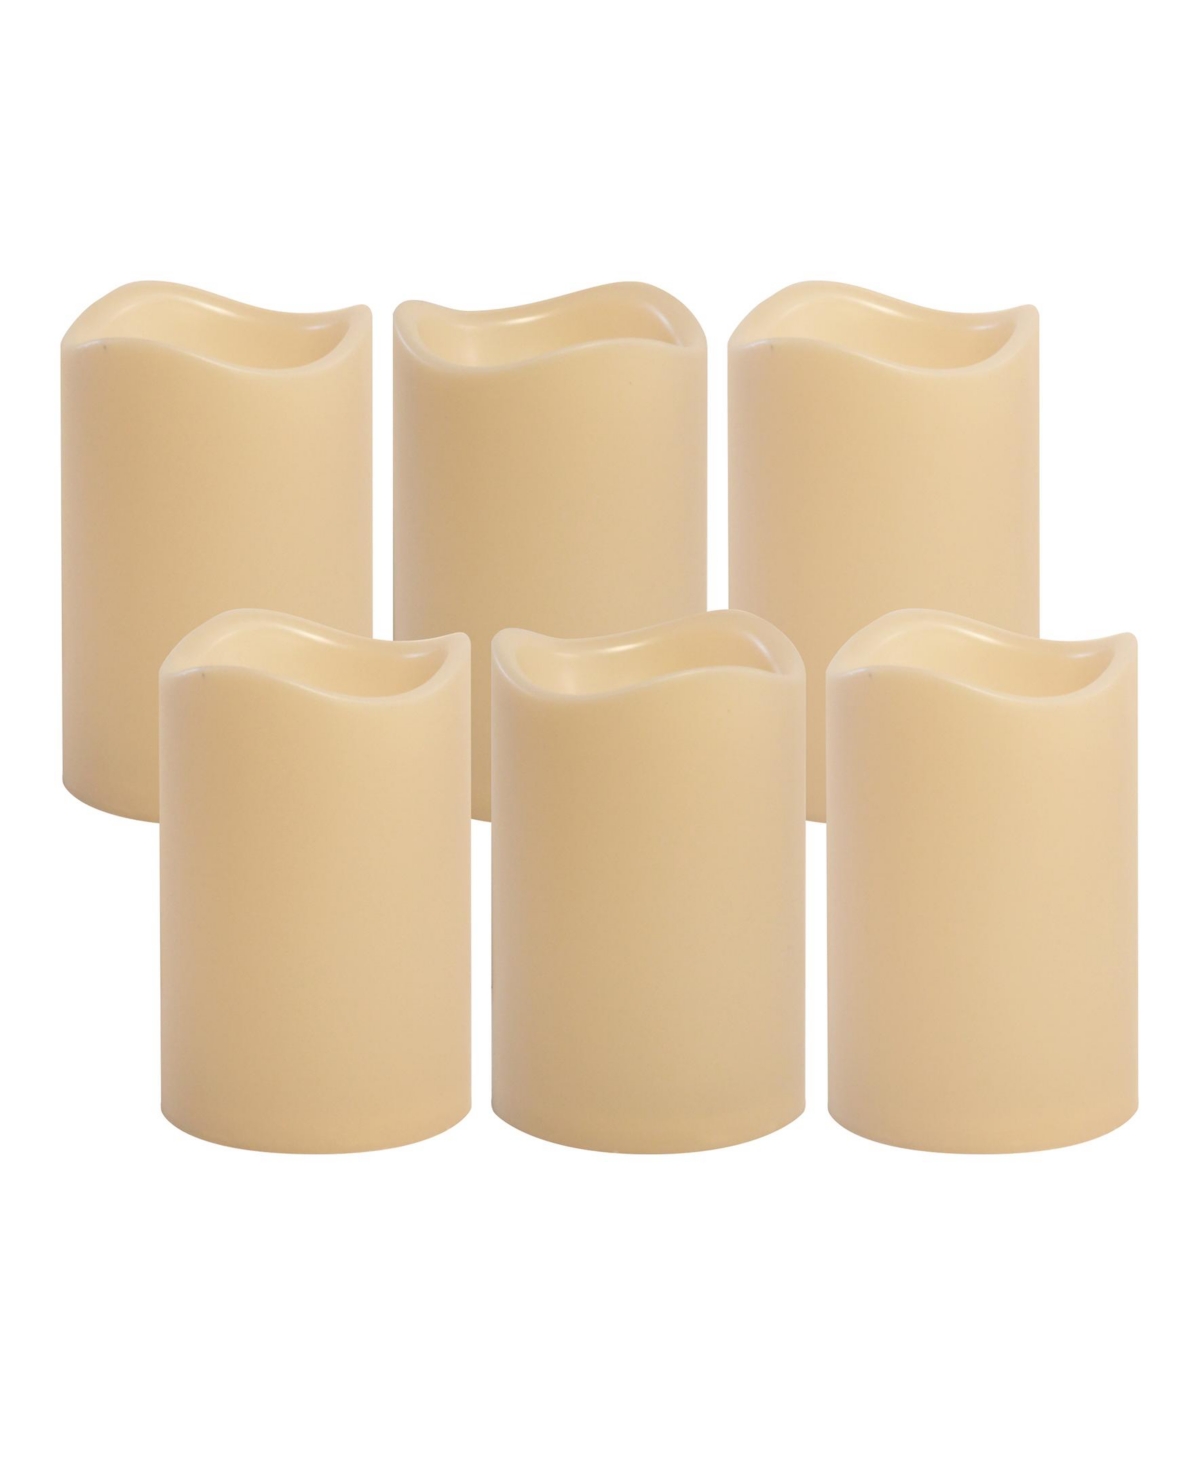 Battery Operated Led Pillar Candles, Set of 6 - Cream